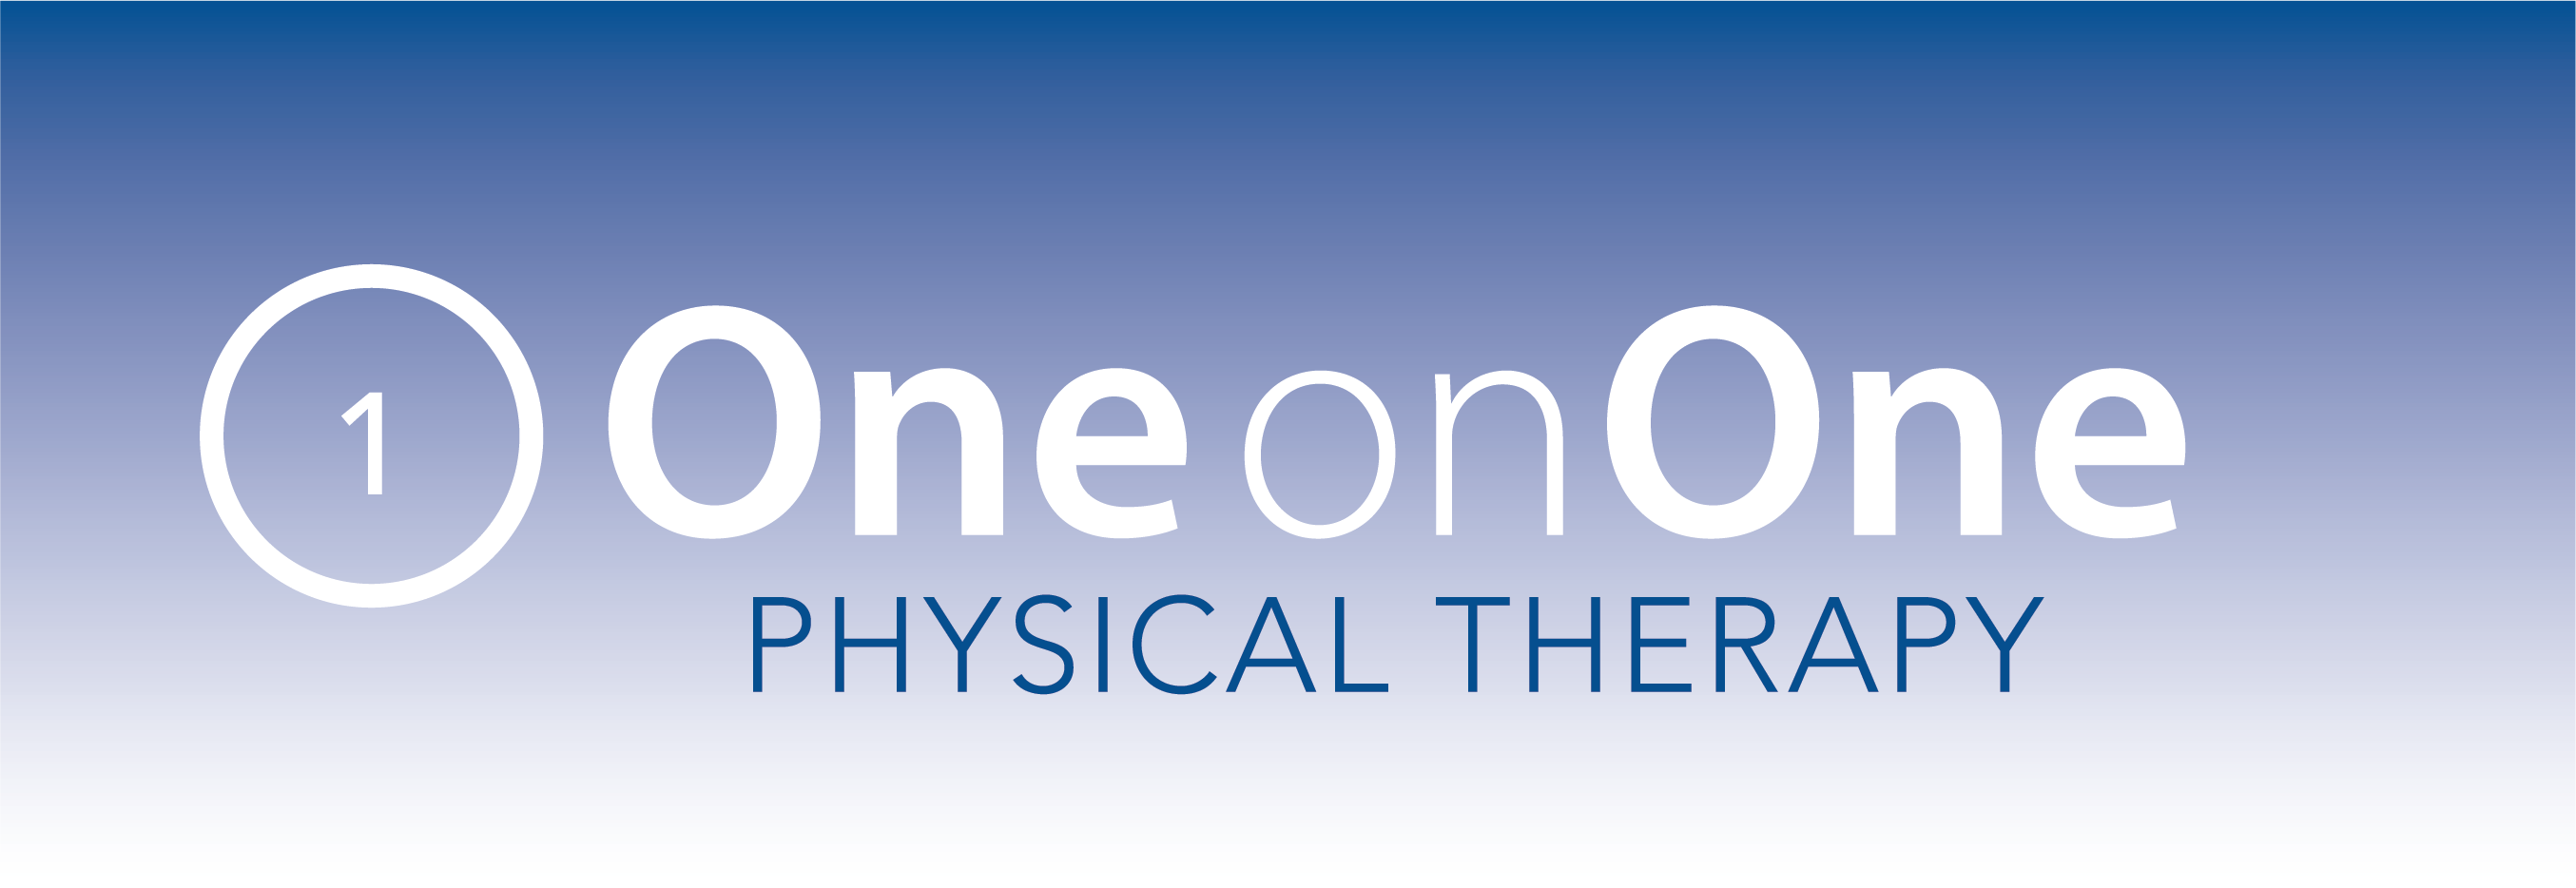 One on One Physical Therapy Pilates smyrna United States